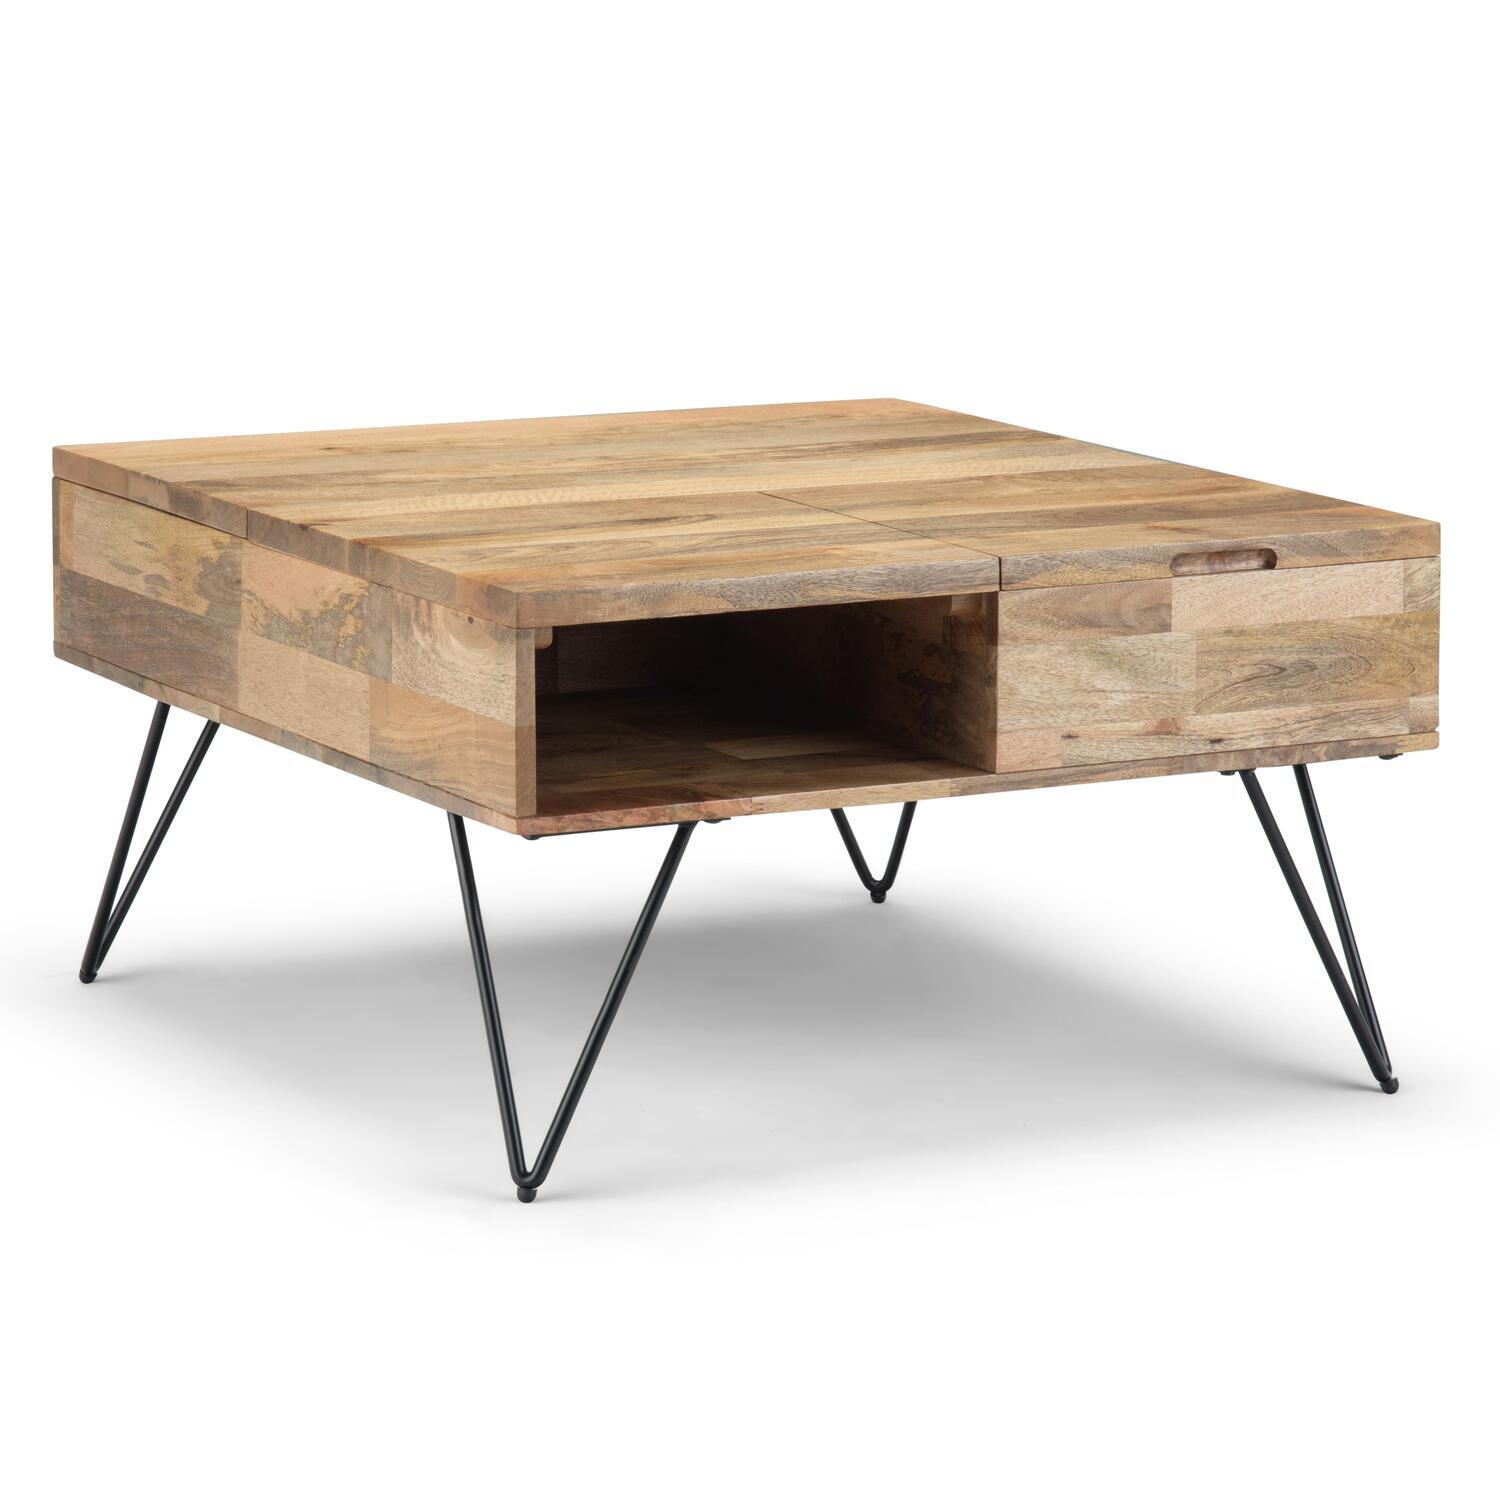 Hunter SOLID MANGO WOOD and Metal 32 inch Wide Square Industrial Lift Top Coffee Table in Natural - image 1 of 7